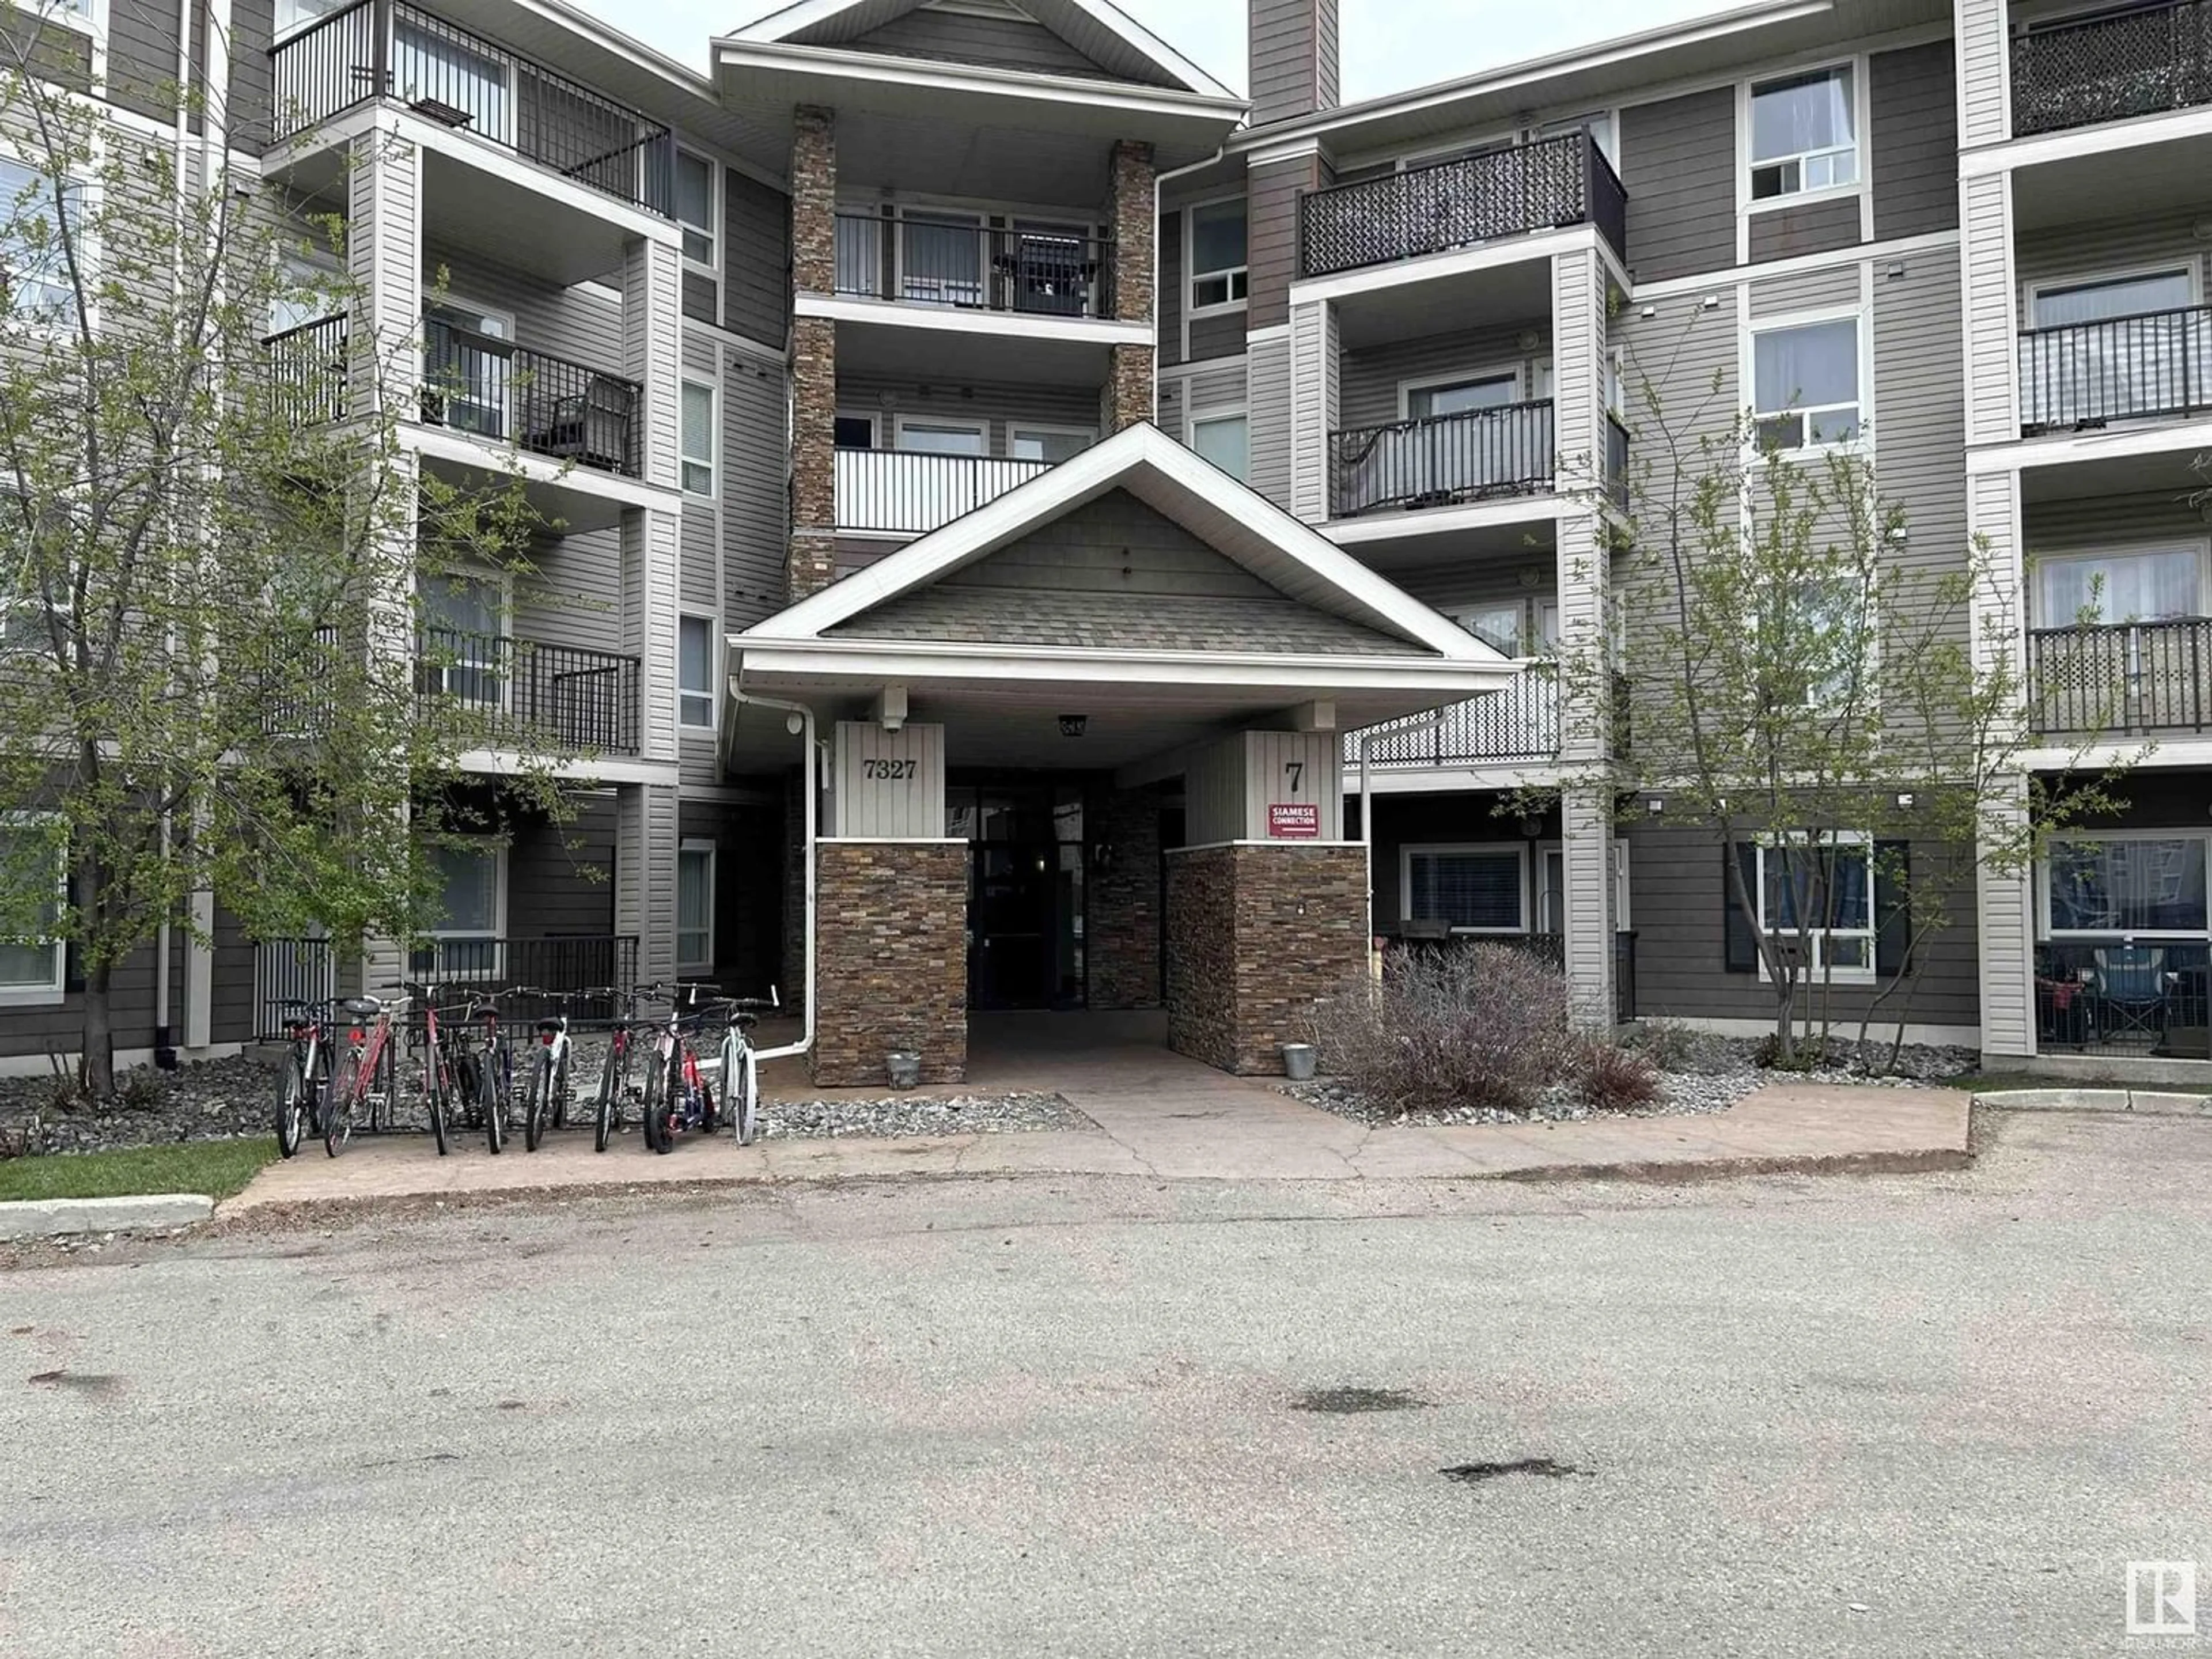 A pic from exterior of the house or condo for #7305 7327 SOUTH TERWILLEGAR DR NW, Edmonton Alberta T6R0L8